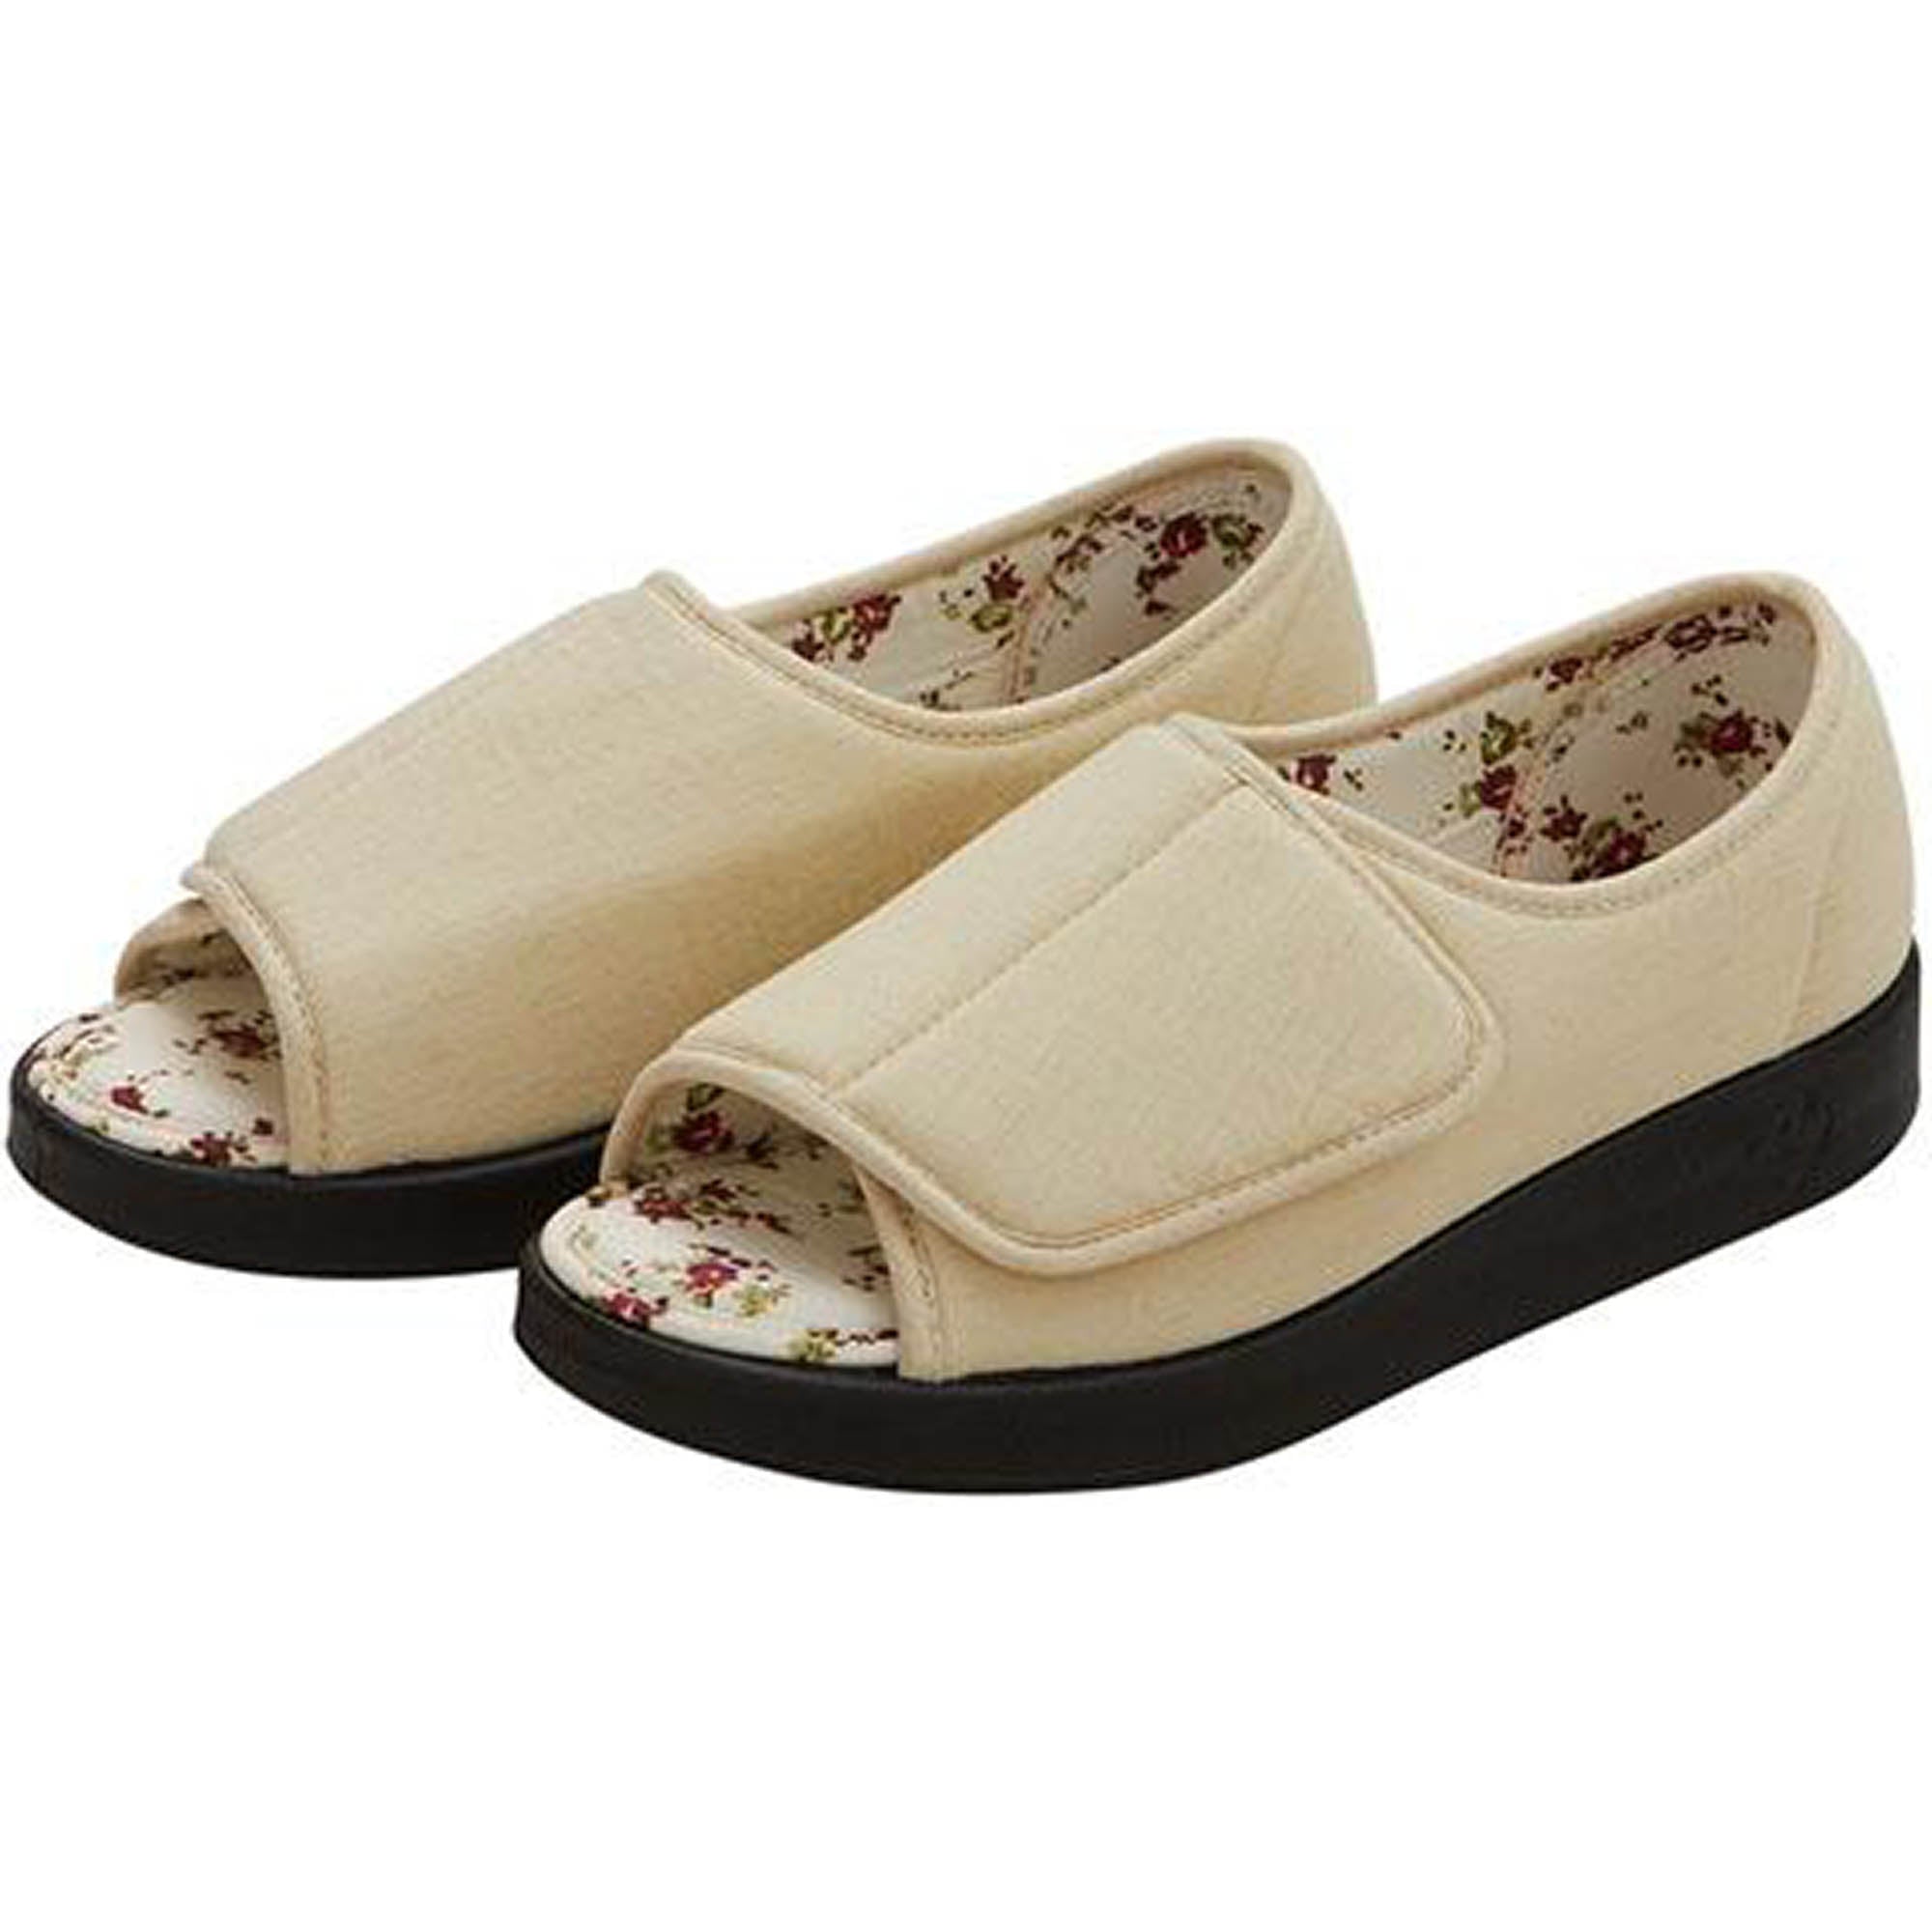 Silverts Women's Extra Wide Open-Toed Shoes - Misty Rose - 9